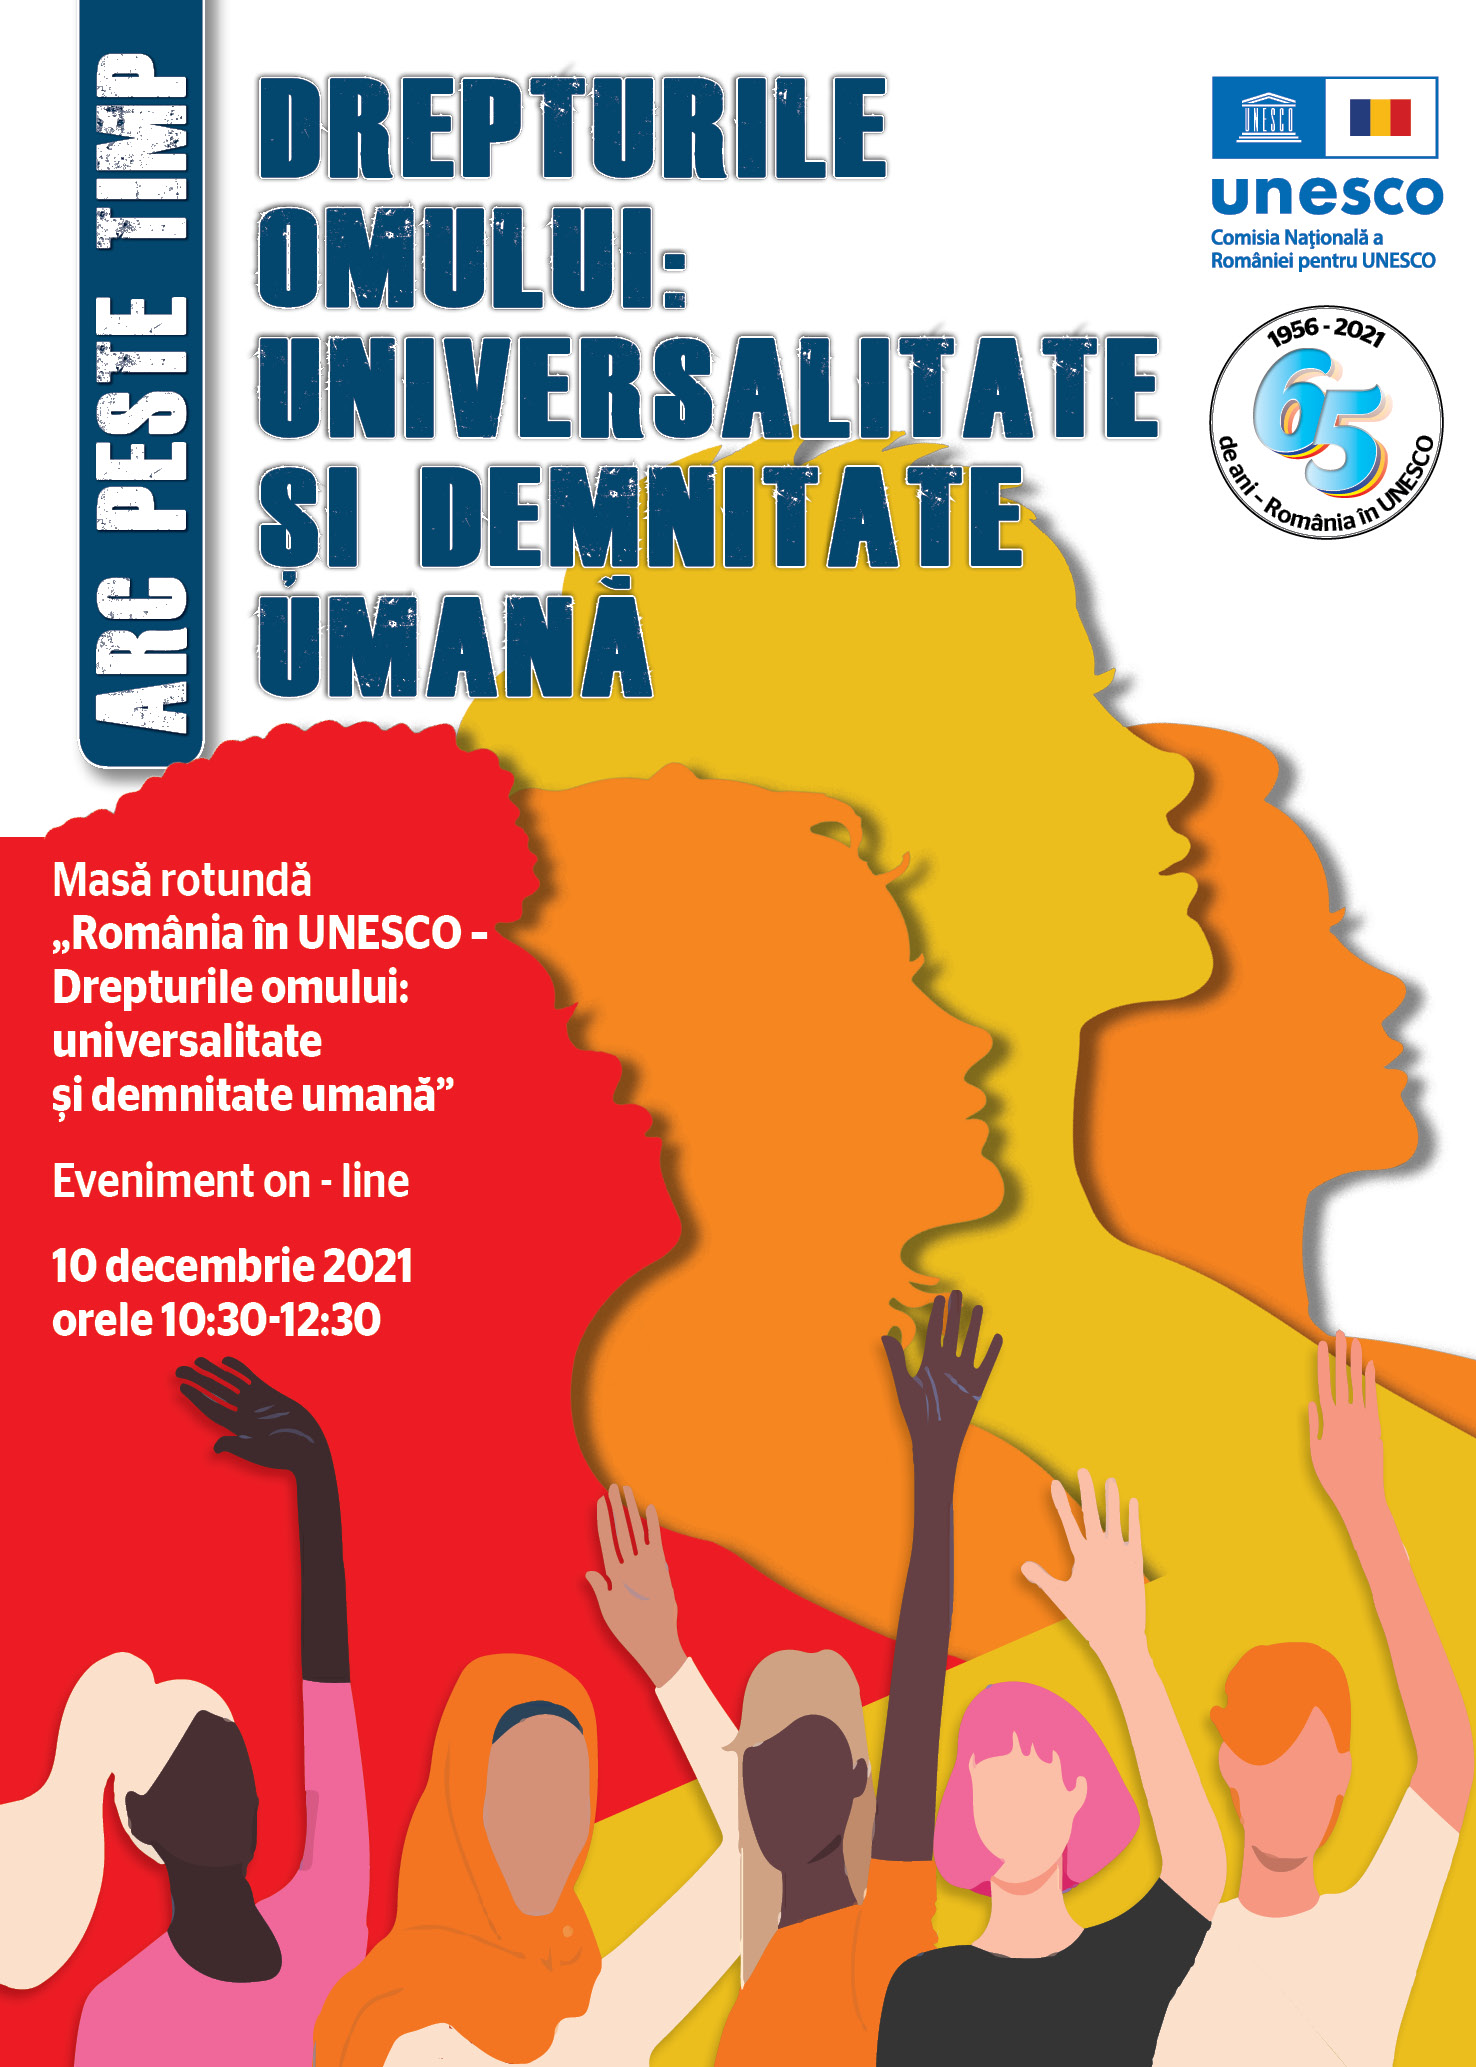 National Commission of Romania for UNESCO launches the series of events from the anniversary program occasioned by the celebration of 65 years of Romanian presence in UNESCO